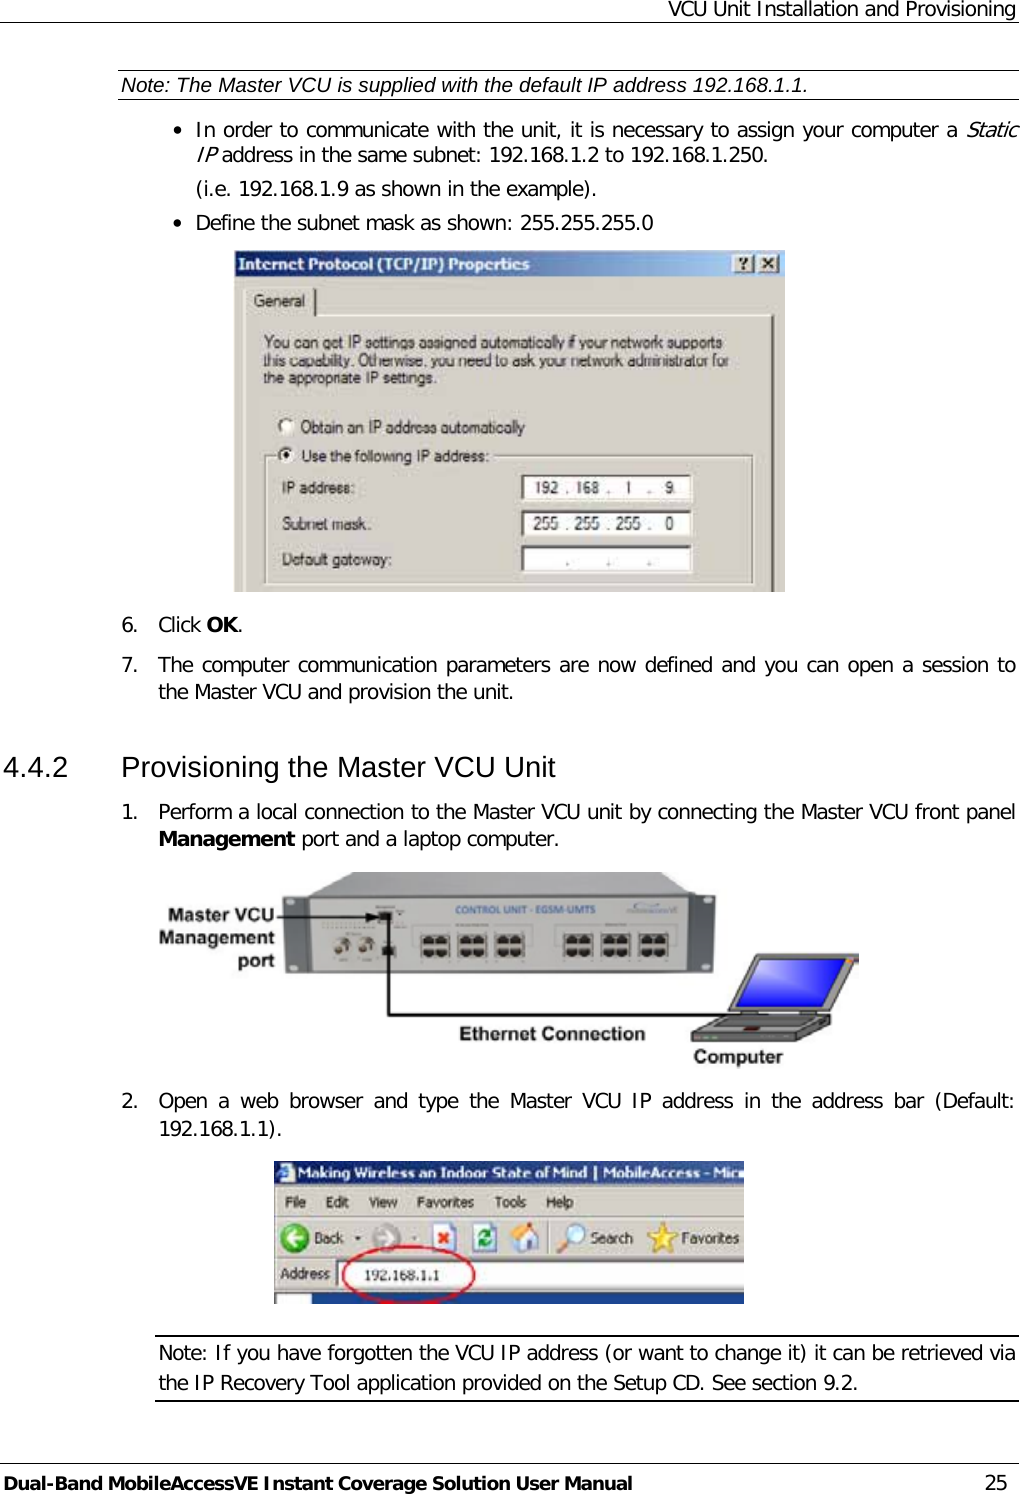 VCU Unit Installation and Provisioning Dual-Band MobileAccessVE Instant Coverage Solution User Manual 25 Note: The Master VCU is supplied with the default IP address 192.168.1.1. · In order to communicate with the unit, it is necessary to assign your computer a Static IP address in the same subnet: 192.168.1.2 to 192.168.1.250.  (i.e. 192.168.1.9 as shown in the example). · Define the subnet mask as shown: 255.255.255.0  6.  Click OK.  7.  The computer communication parameters are now defined and you can open a session to the Master VCU and provision the unit. 4.4.2  Provisioning the Master VCU Unit 1.  Perform a local connection to the Master VCU unit by connecting the Master VCU front panel Management port and a laptop computer.  2.  Open a web browser and type the  Master VCU IP address in the address bar (Default: 192.168.1.1).  Note: If you have forgotten the VCU IP address (or want to change it) it can be retrieved via the IP Recovery Tool application provided on the Setup CD. See section  9.2. 